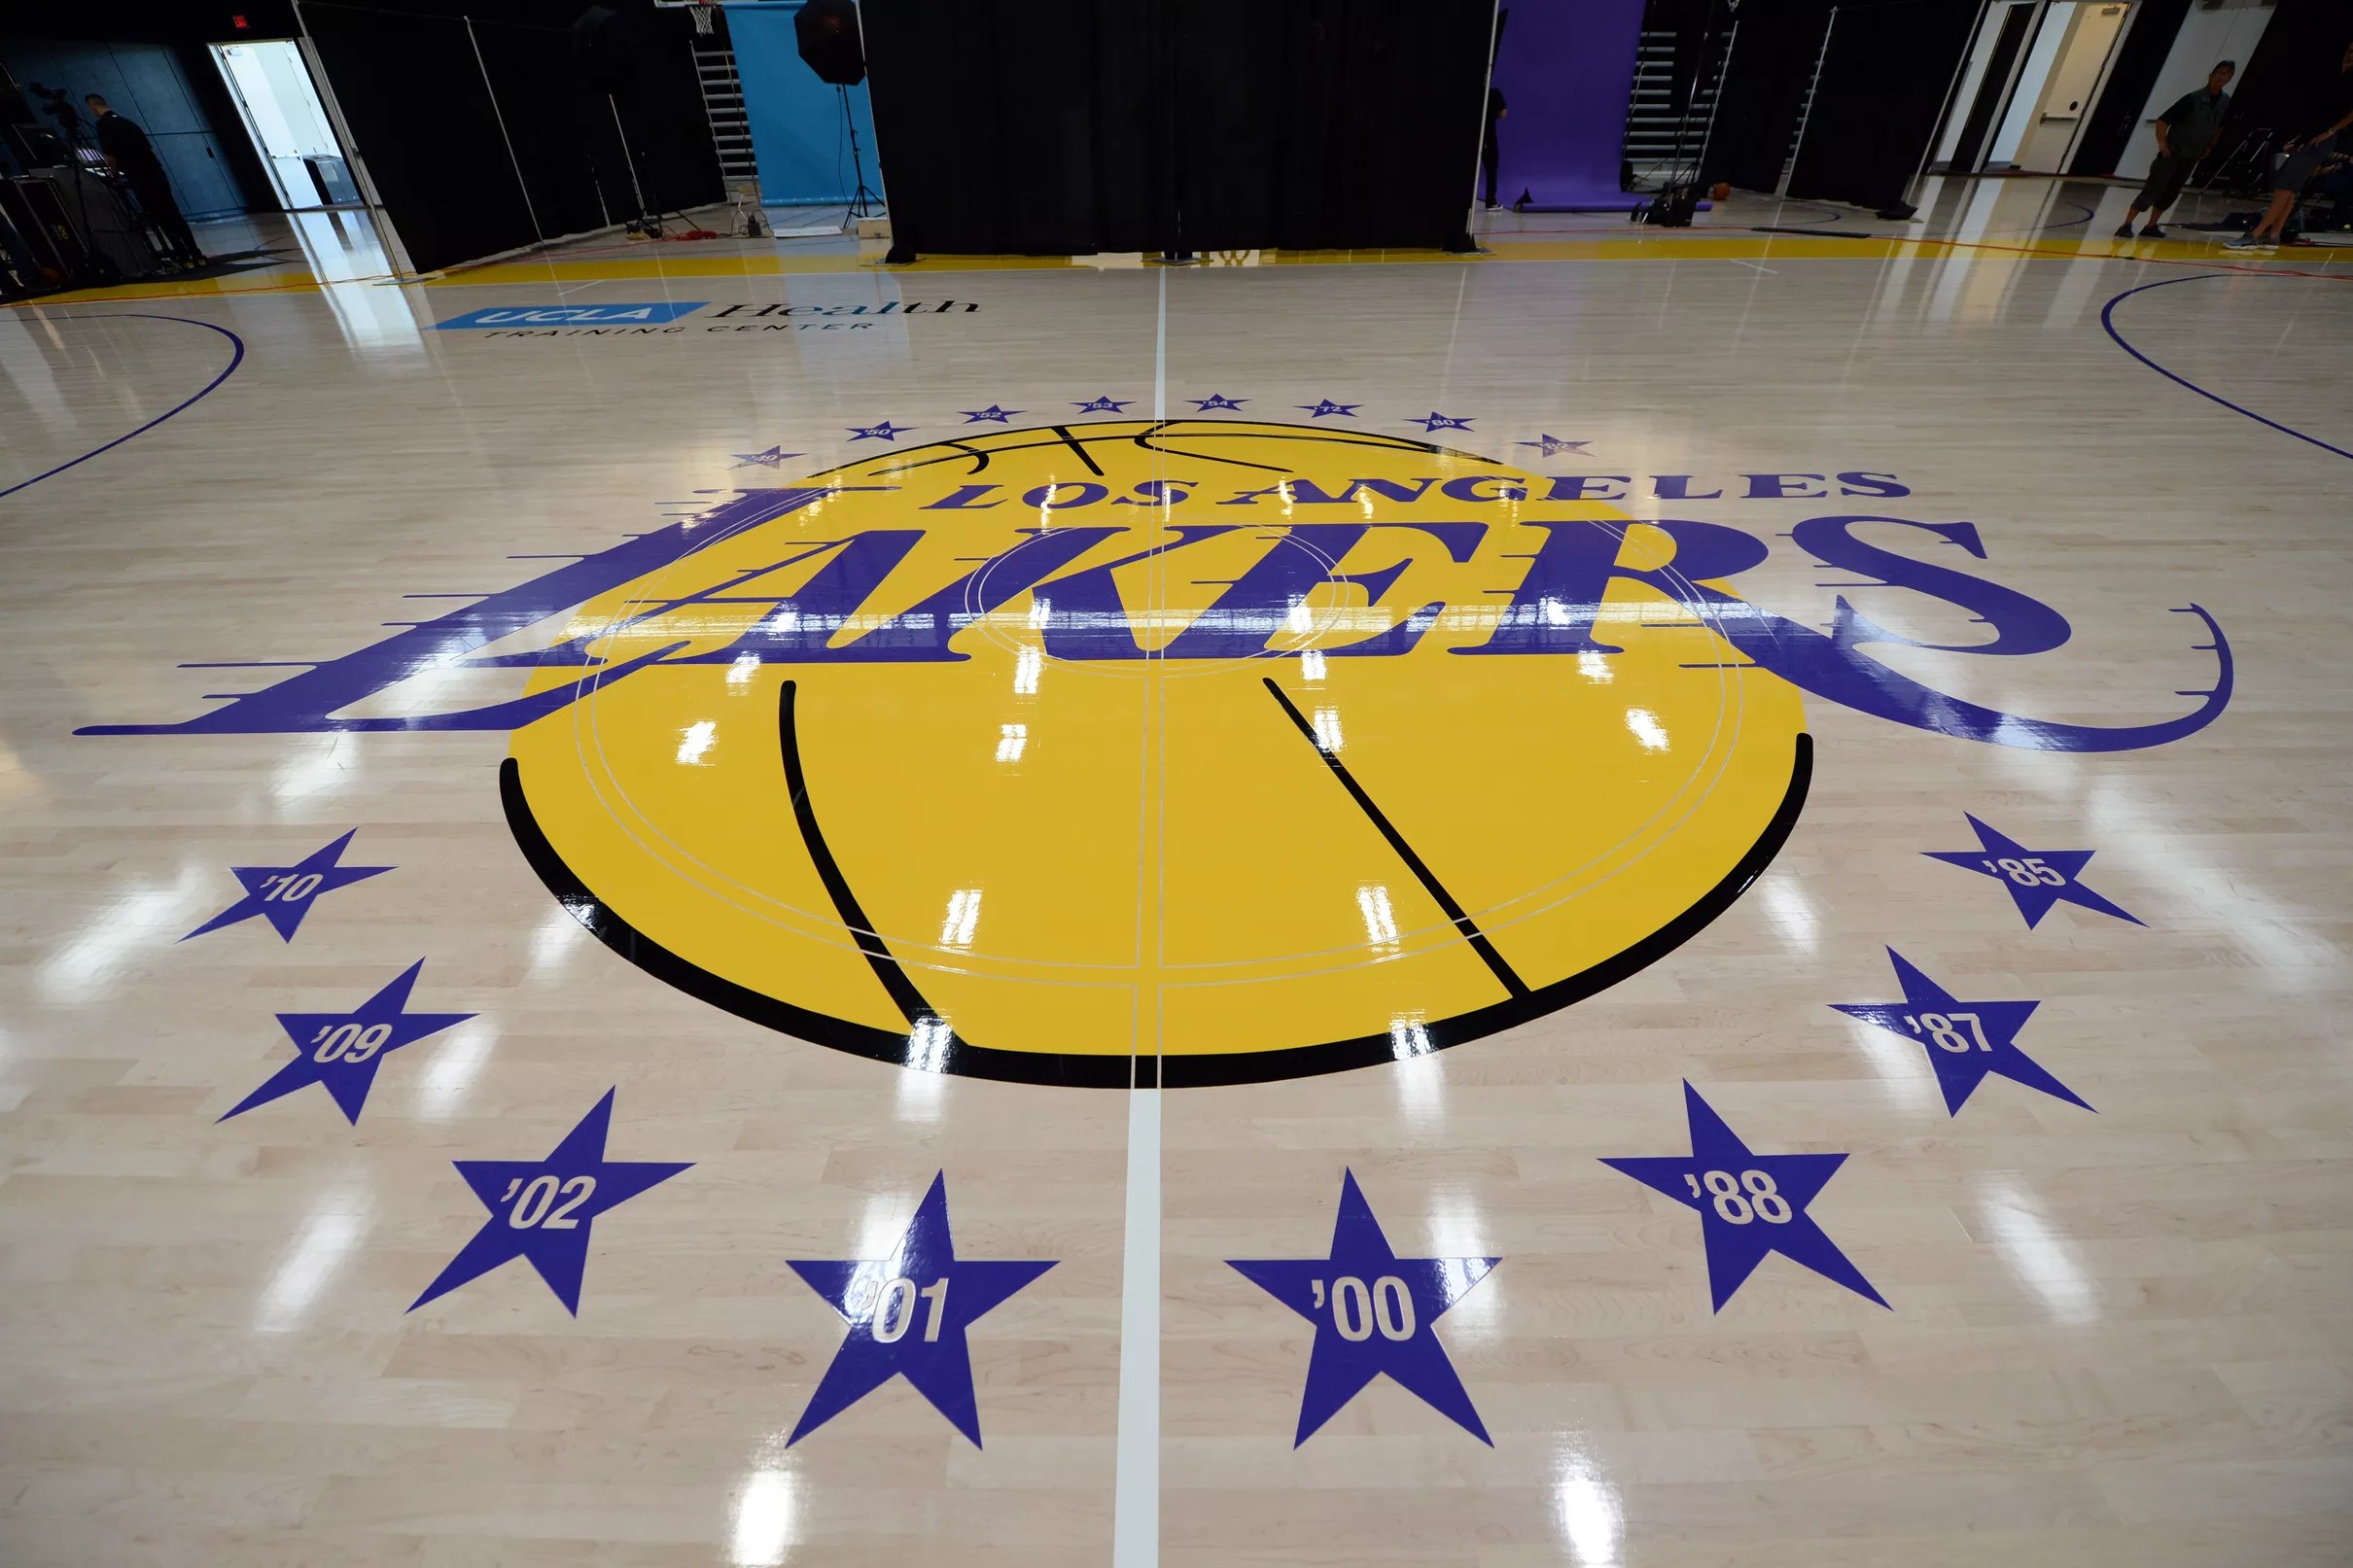 Lakers Training Camp Check out highlights from Day 1 of camp